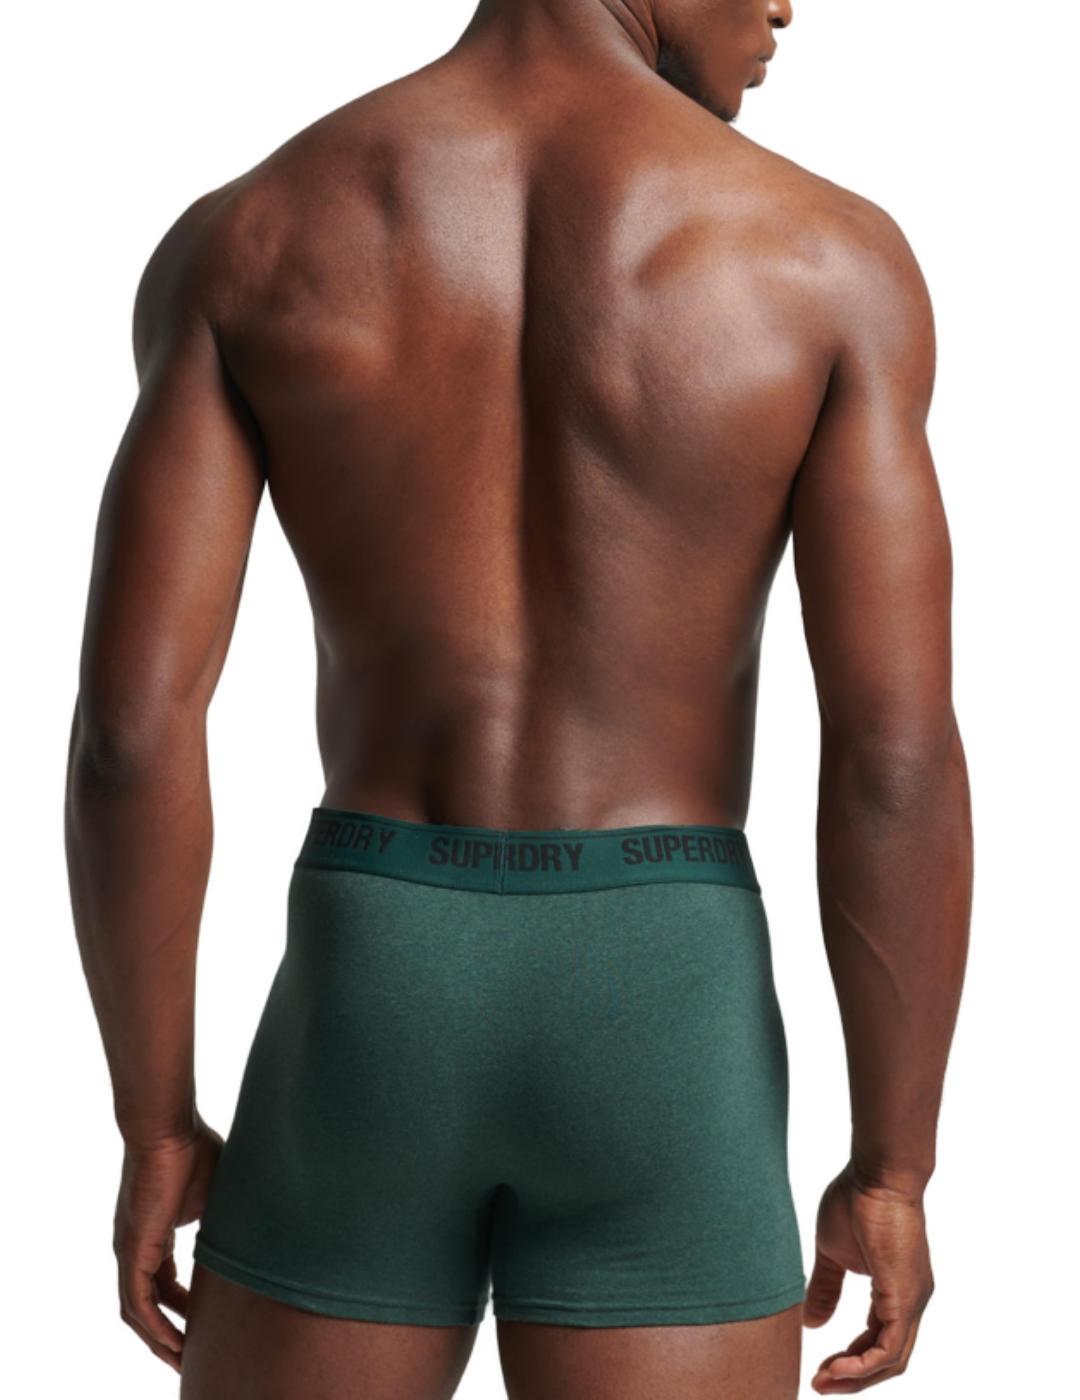 Intimo Superdry boxer pack2 verde para hombre-b